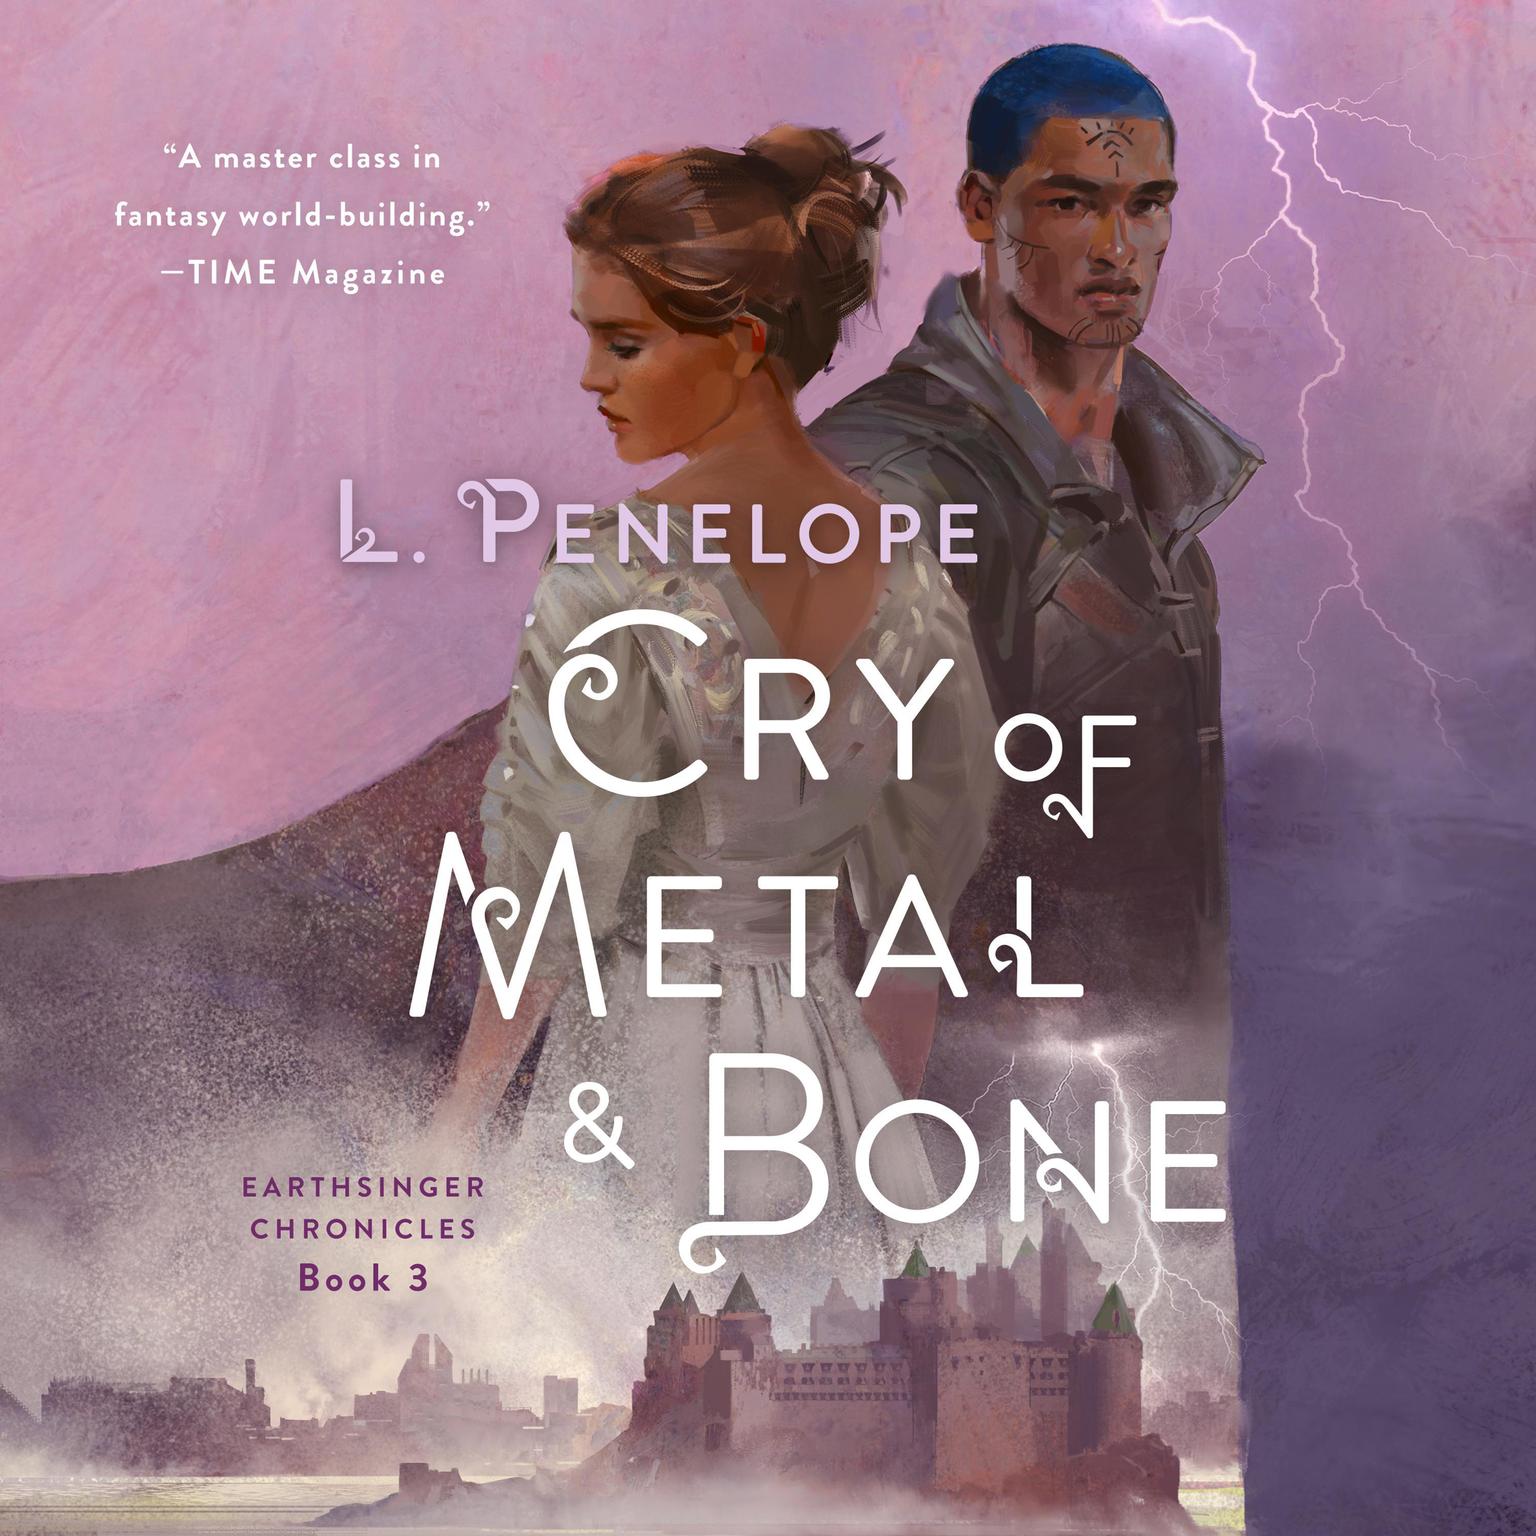 Cry of Metal & Bone: Earthsinger Chronicles, Book 3 Audiobook, by L. Penelope